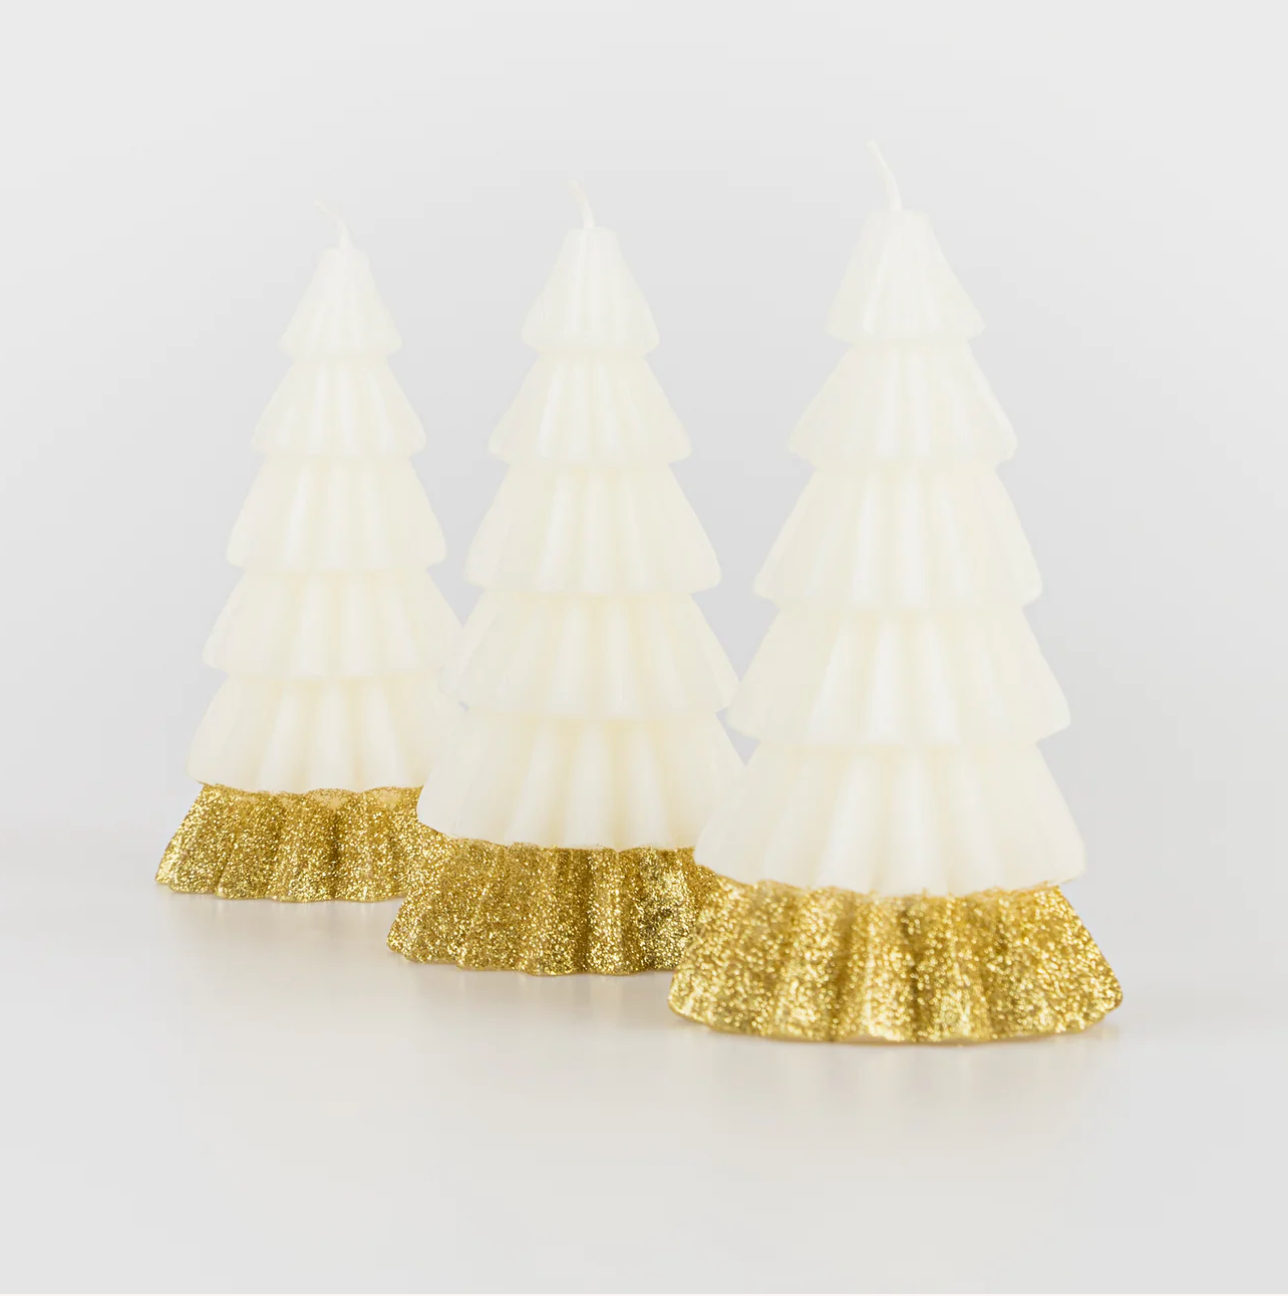 Ivory Tree Candles (x 3)